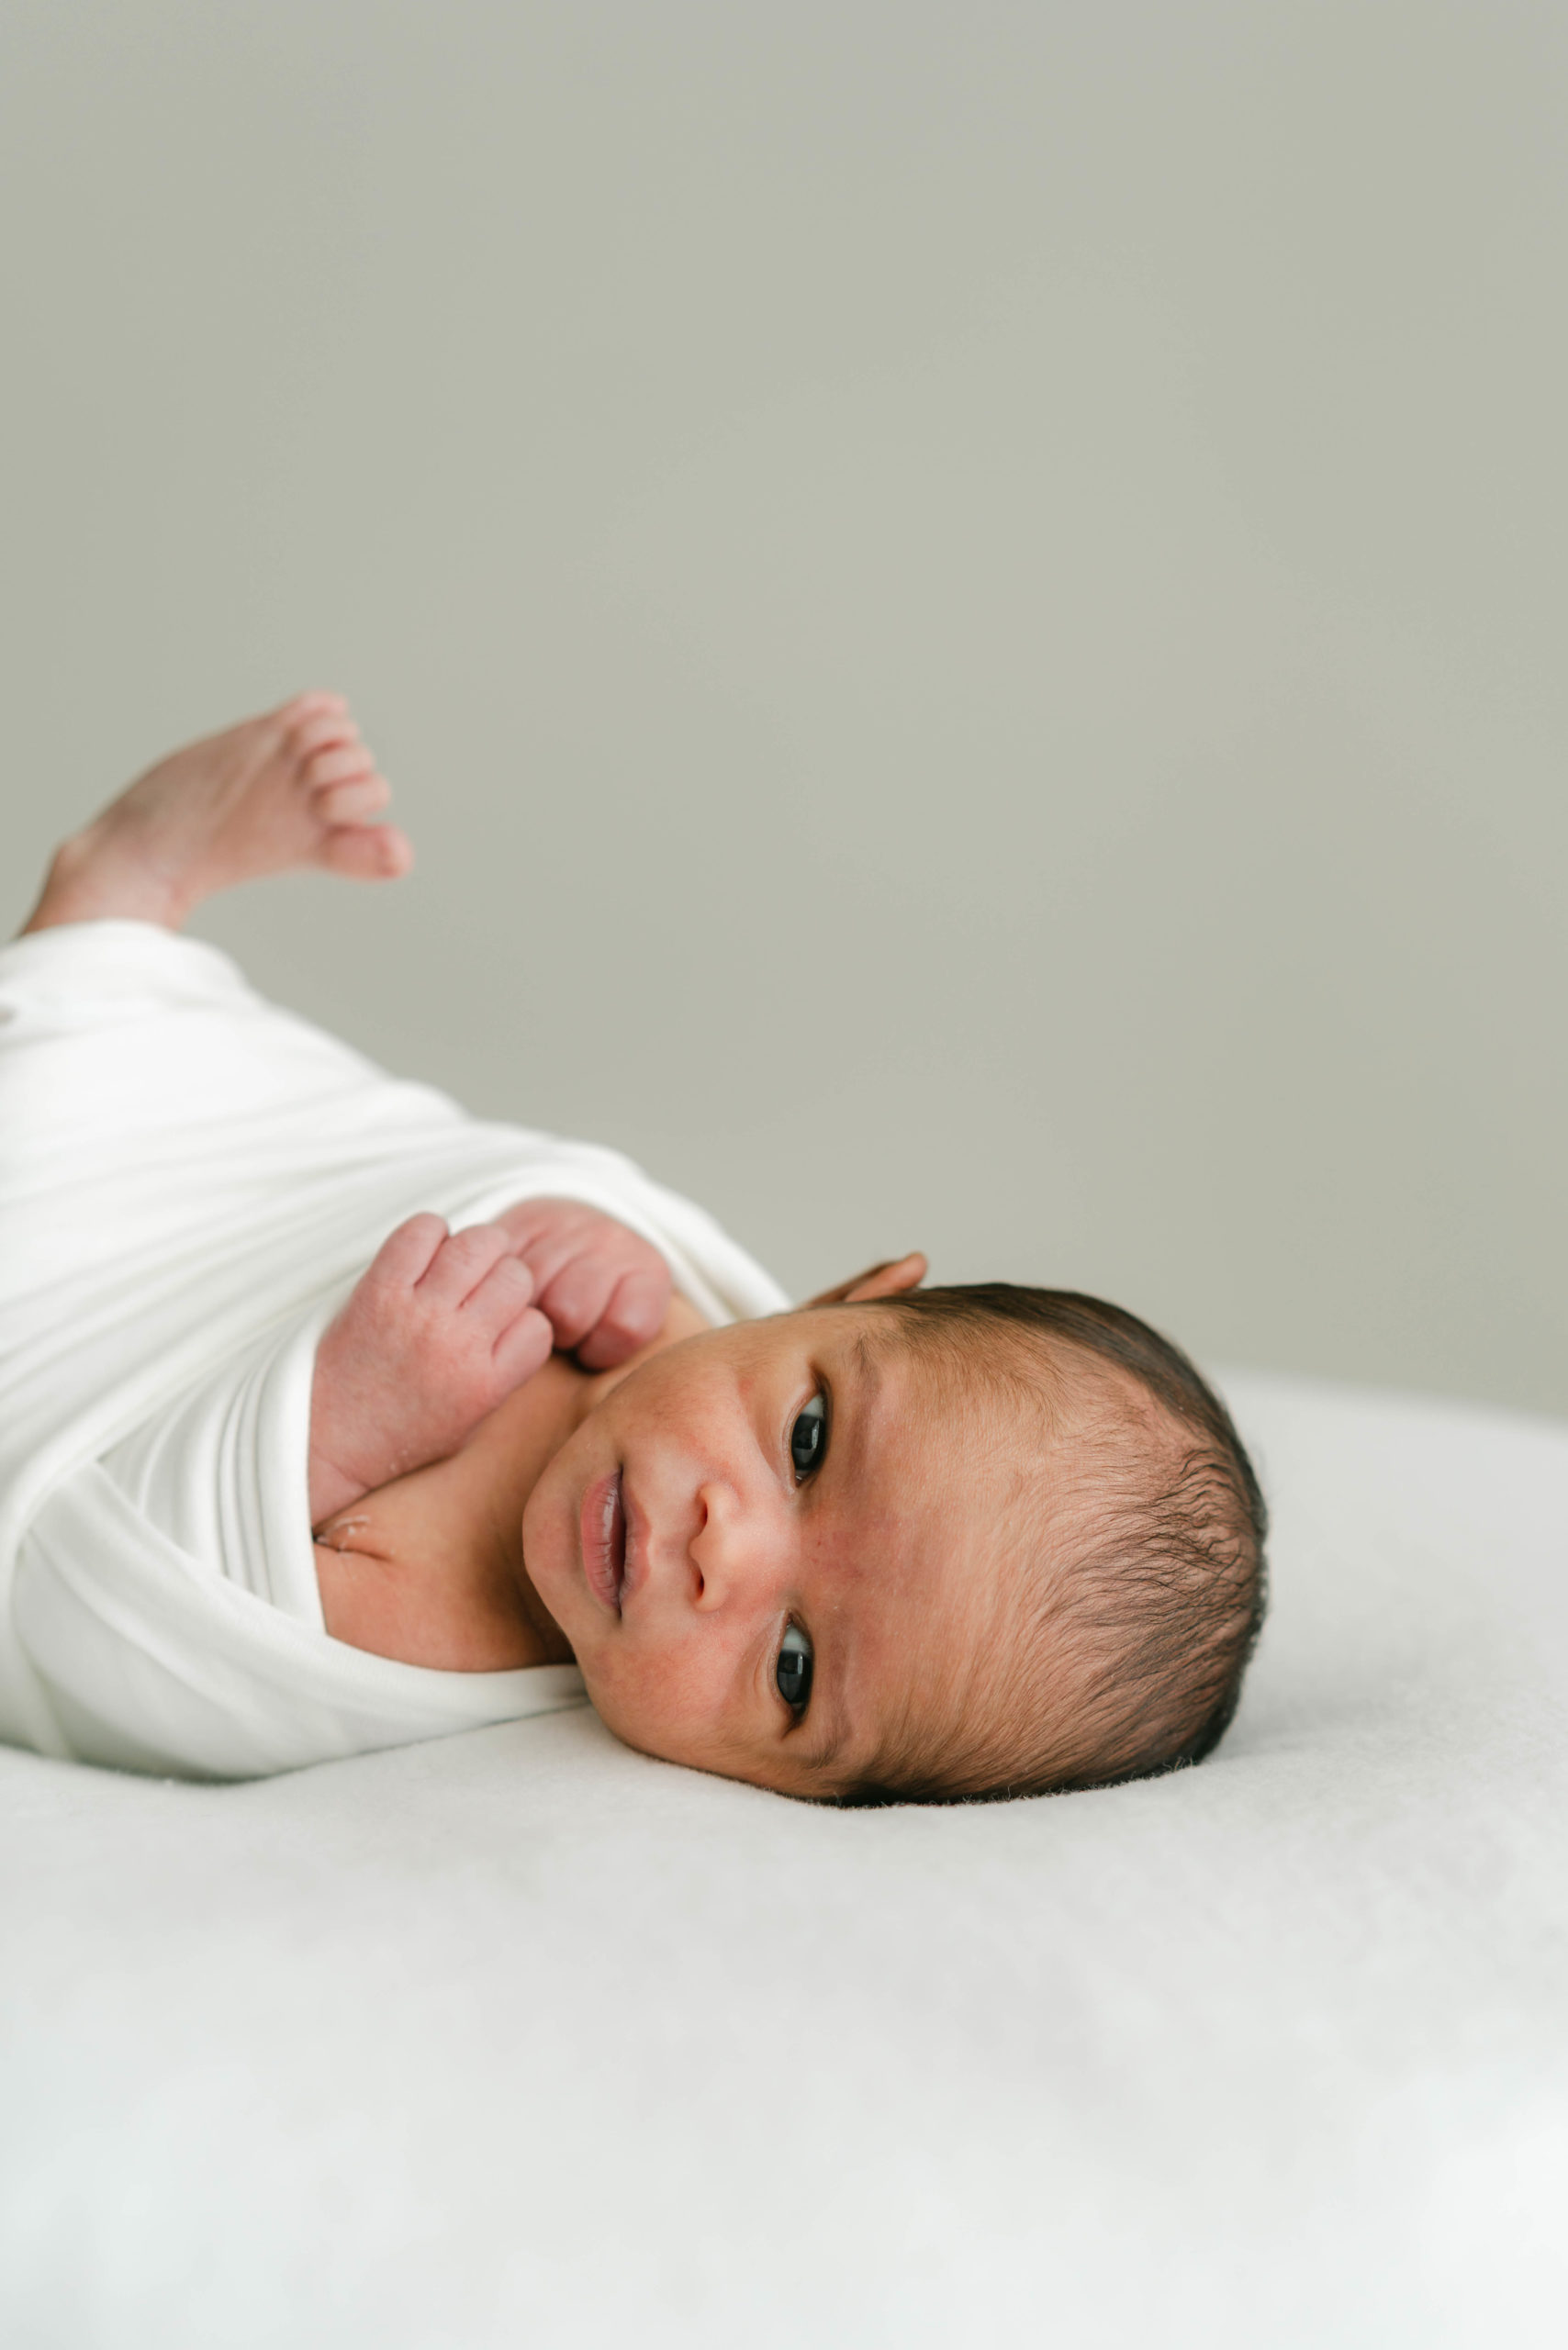 Newborn in white swaddle during lifestyle newborn session by Lauren Sosler Photography.